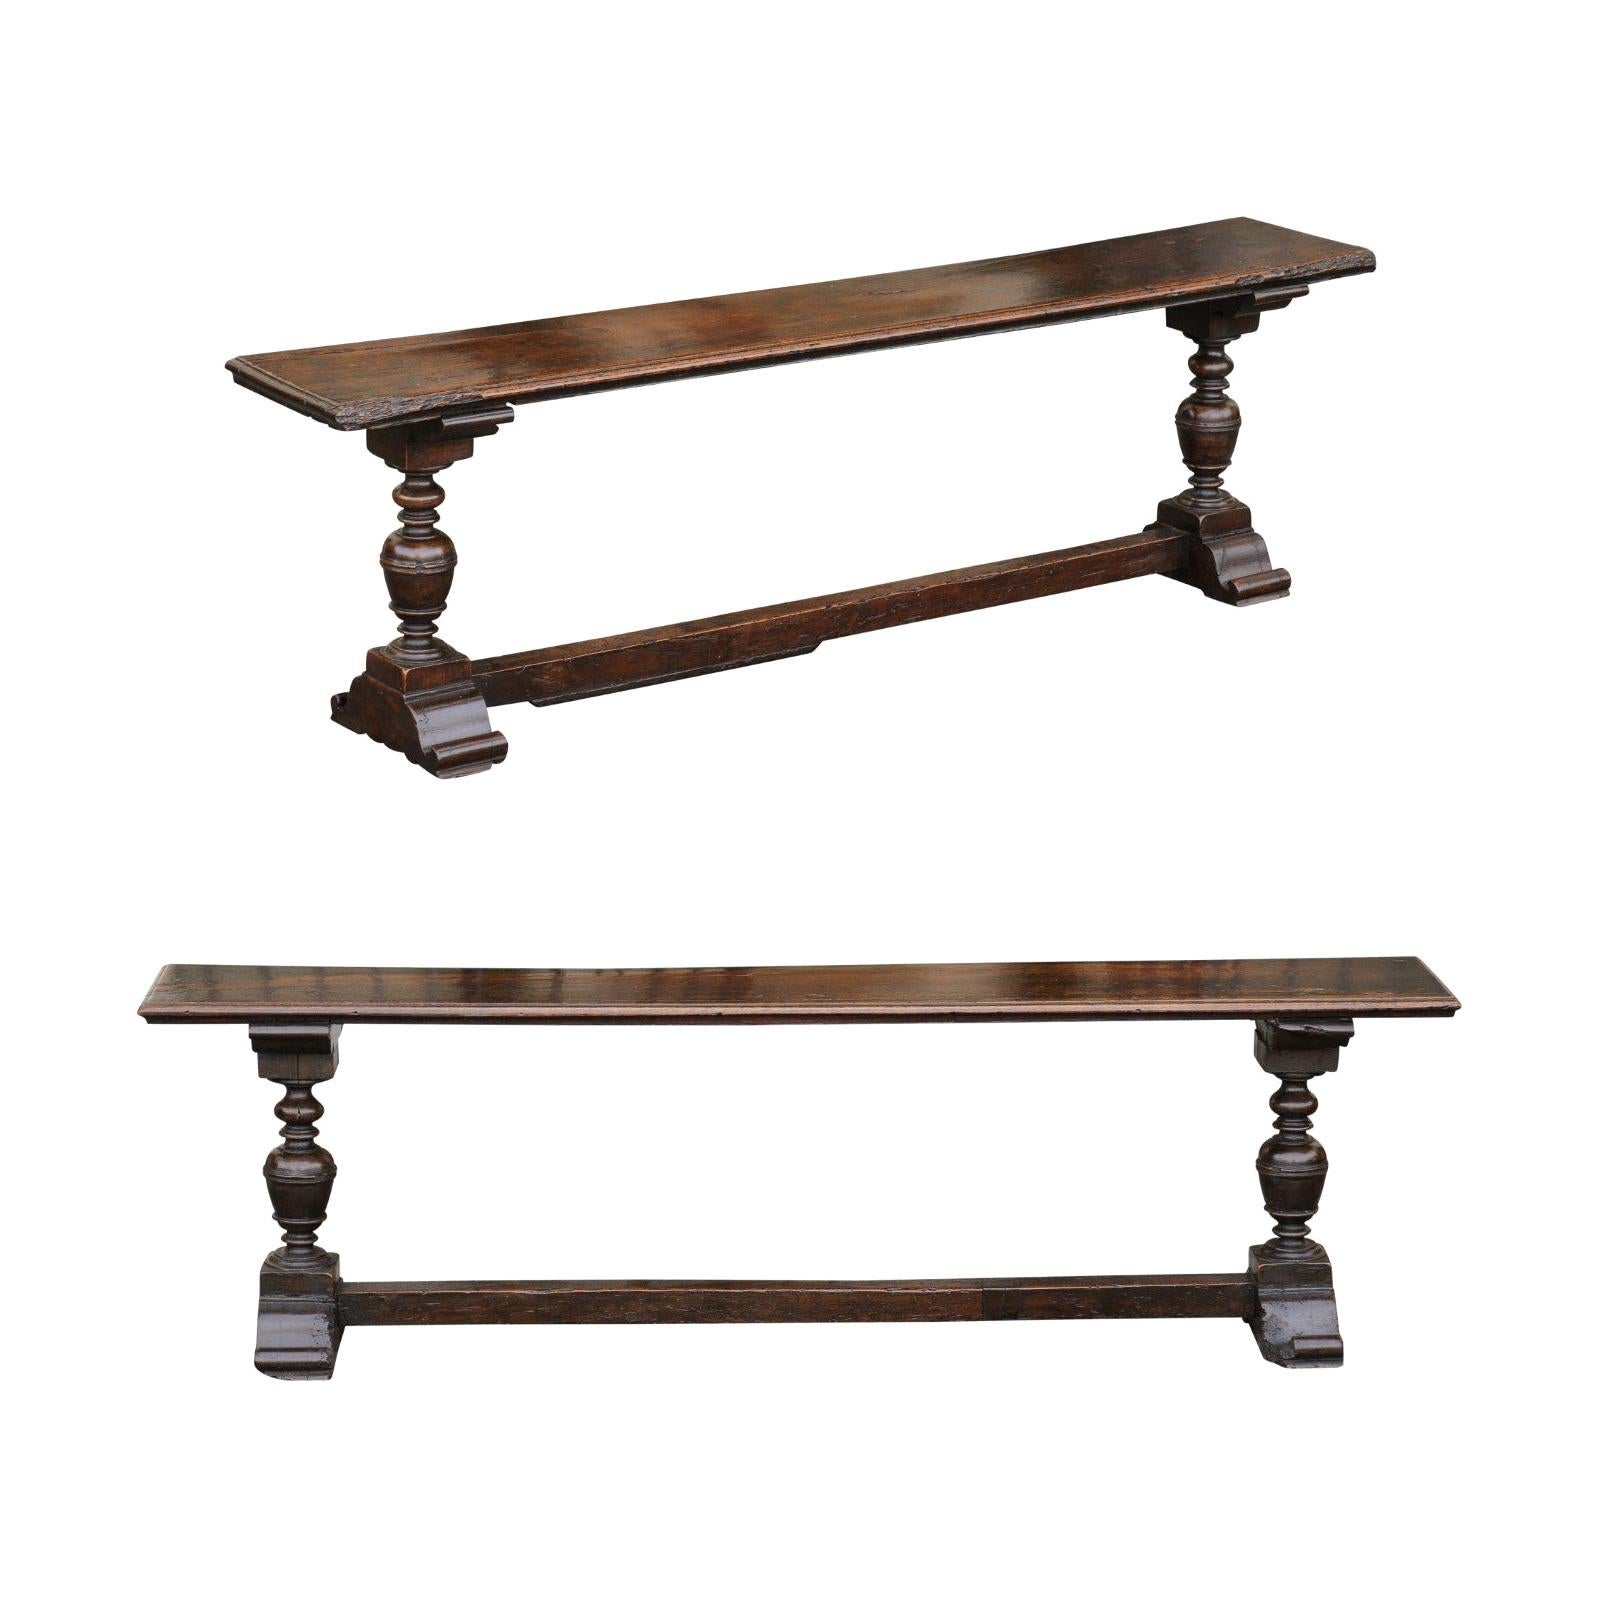 Two English Georgian Period Walnut Benches with Turned Legs and Cross Stretcher For Sale